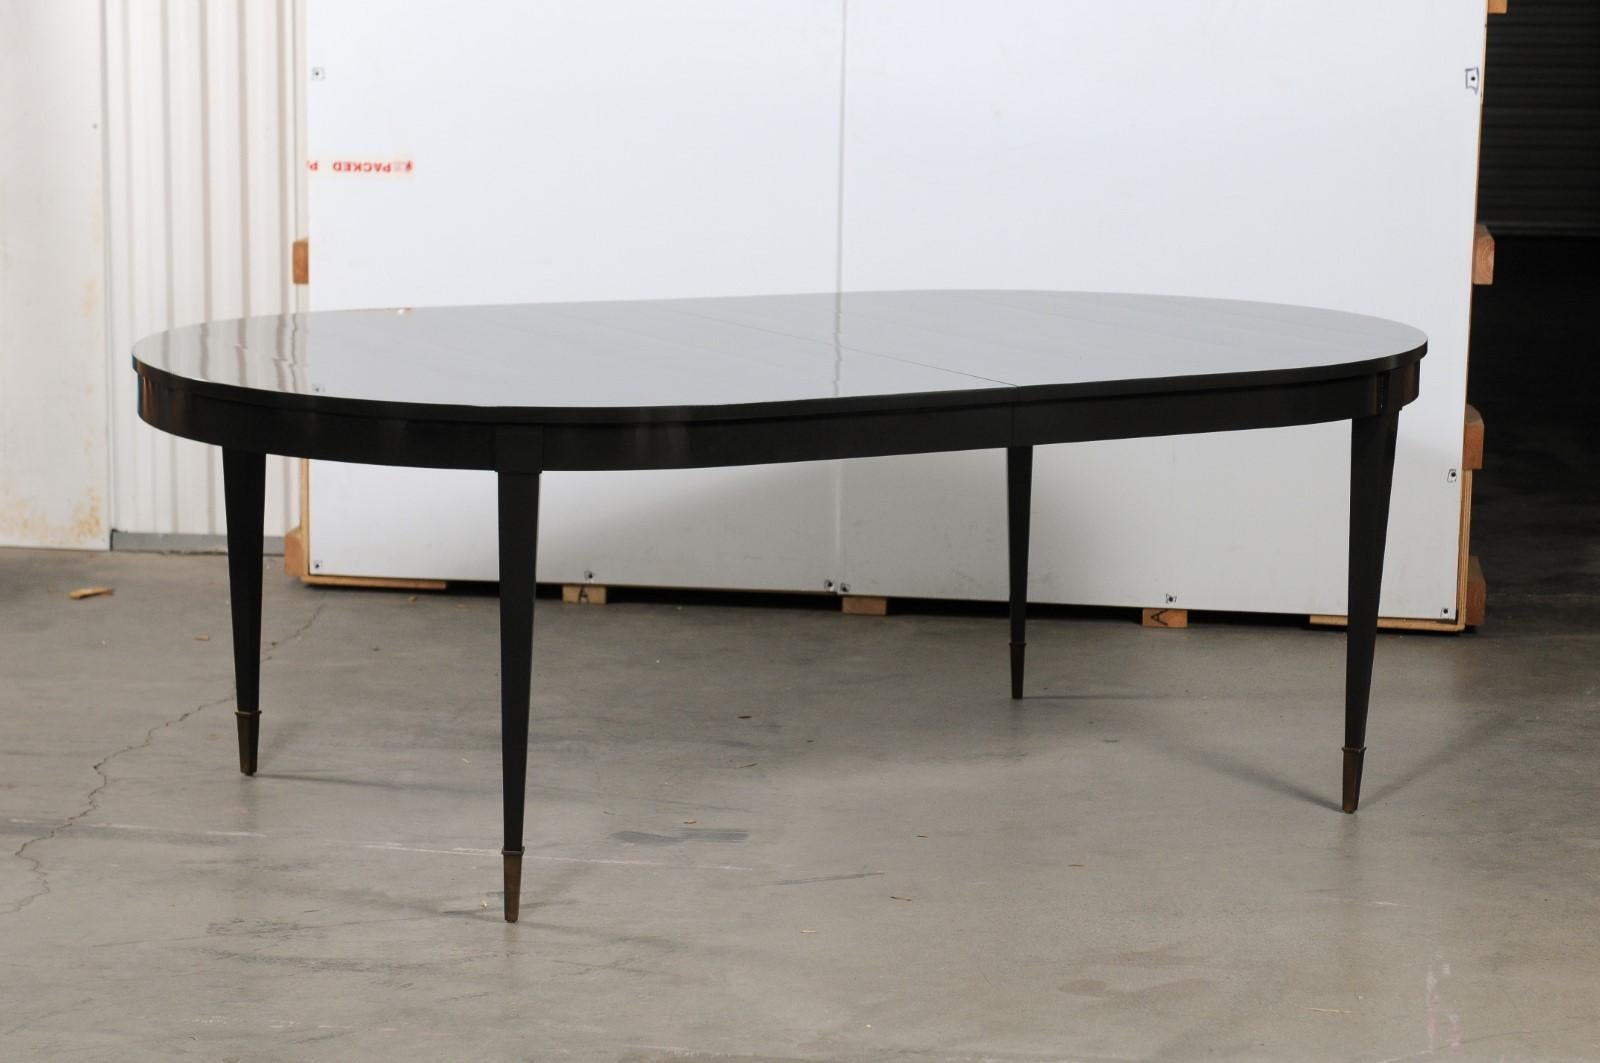 Thomas Pheasant for Baker oval dining table that has been refinished in Benjamin Moore, black satin #2131-10 with a lacquer finish. The oval top rests on a conforming apron with four tapering legs, and leaves that can be removed as needed. Please